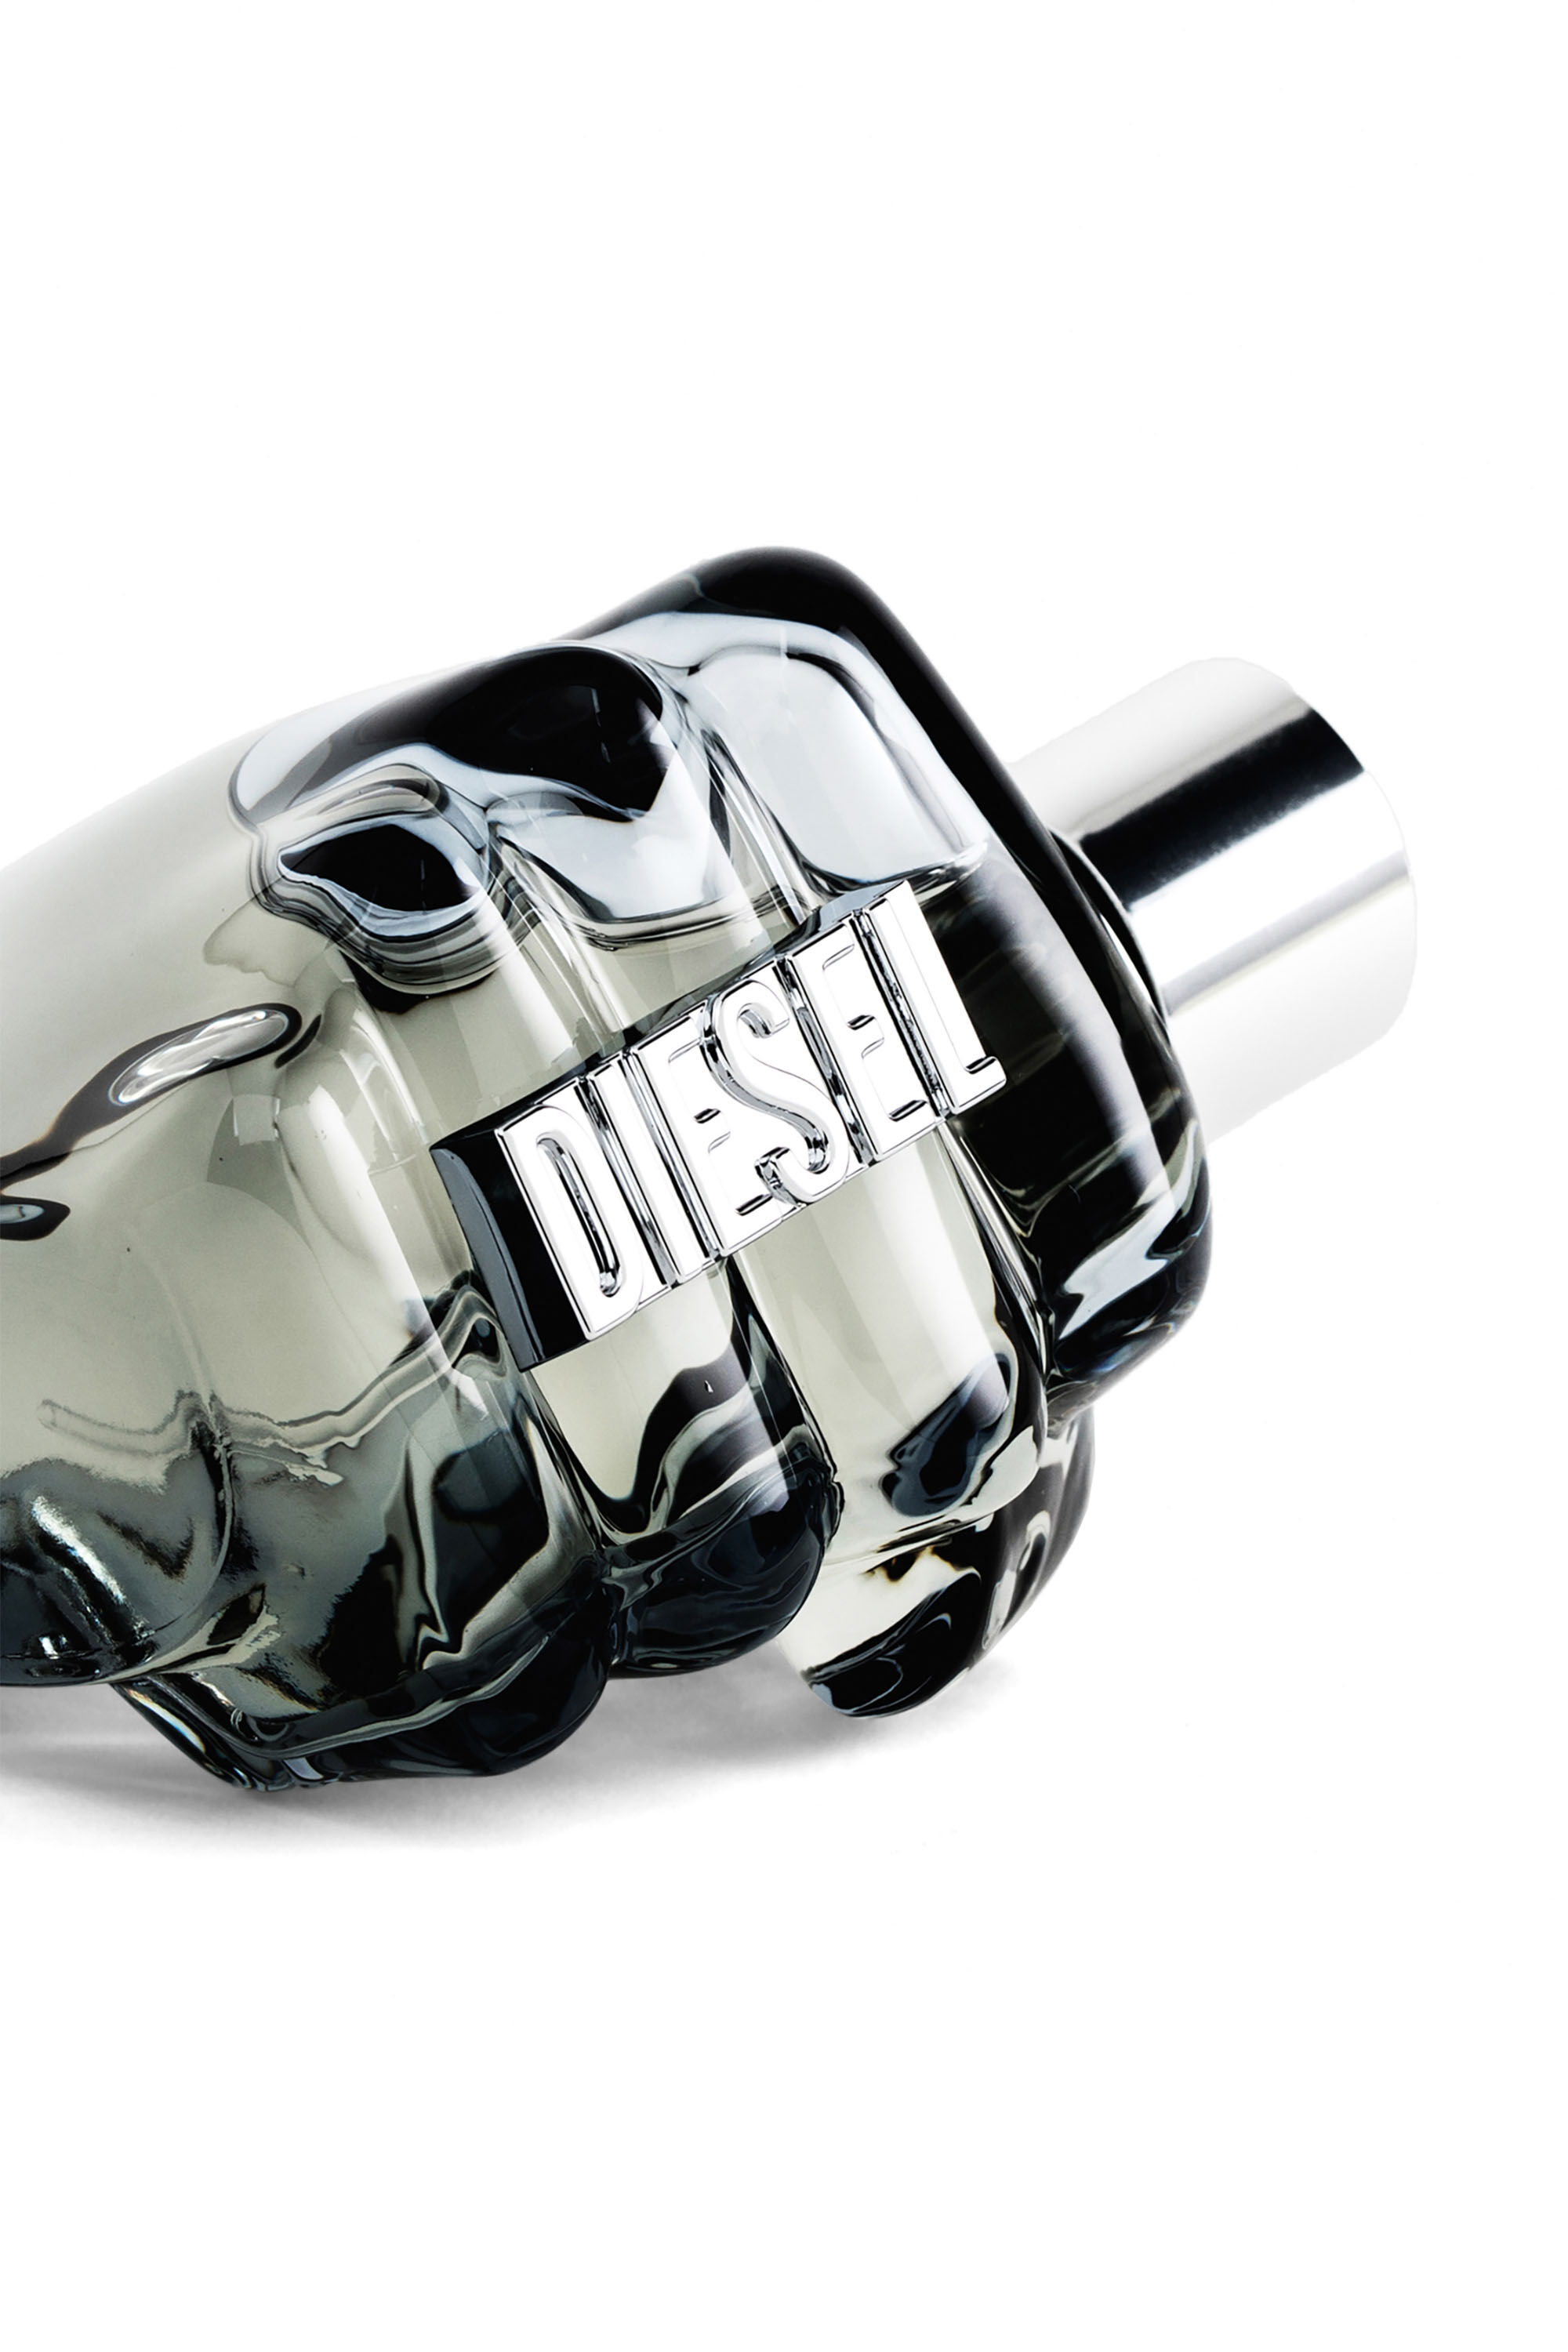 Diesel - ONLY THE BRAVE 50ML, White - Image 2